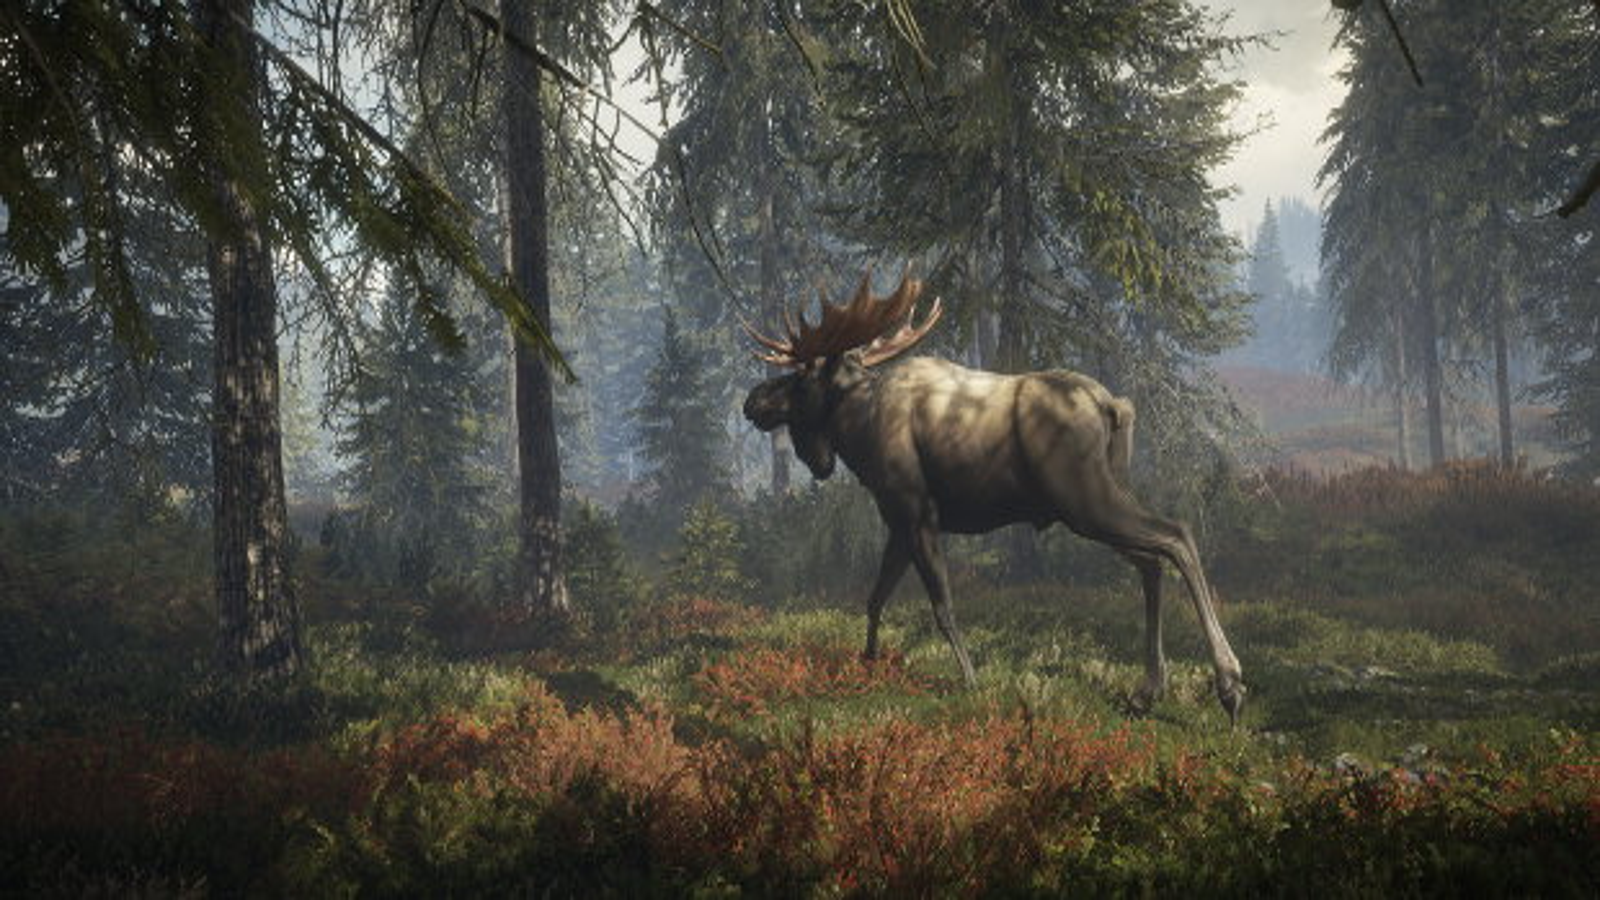 theHunter: Call of the Wild Official Facebook Group